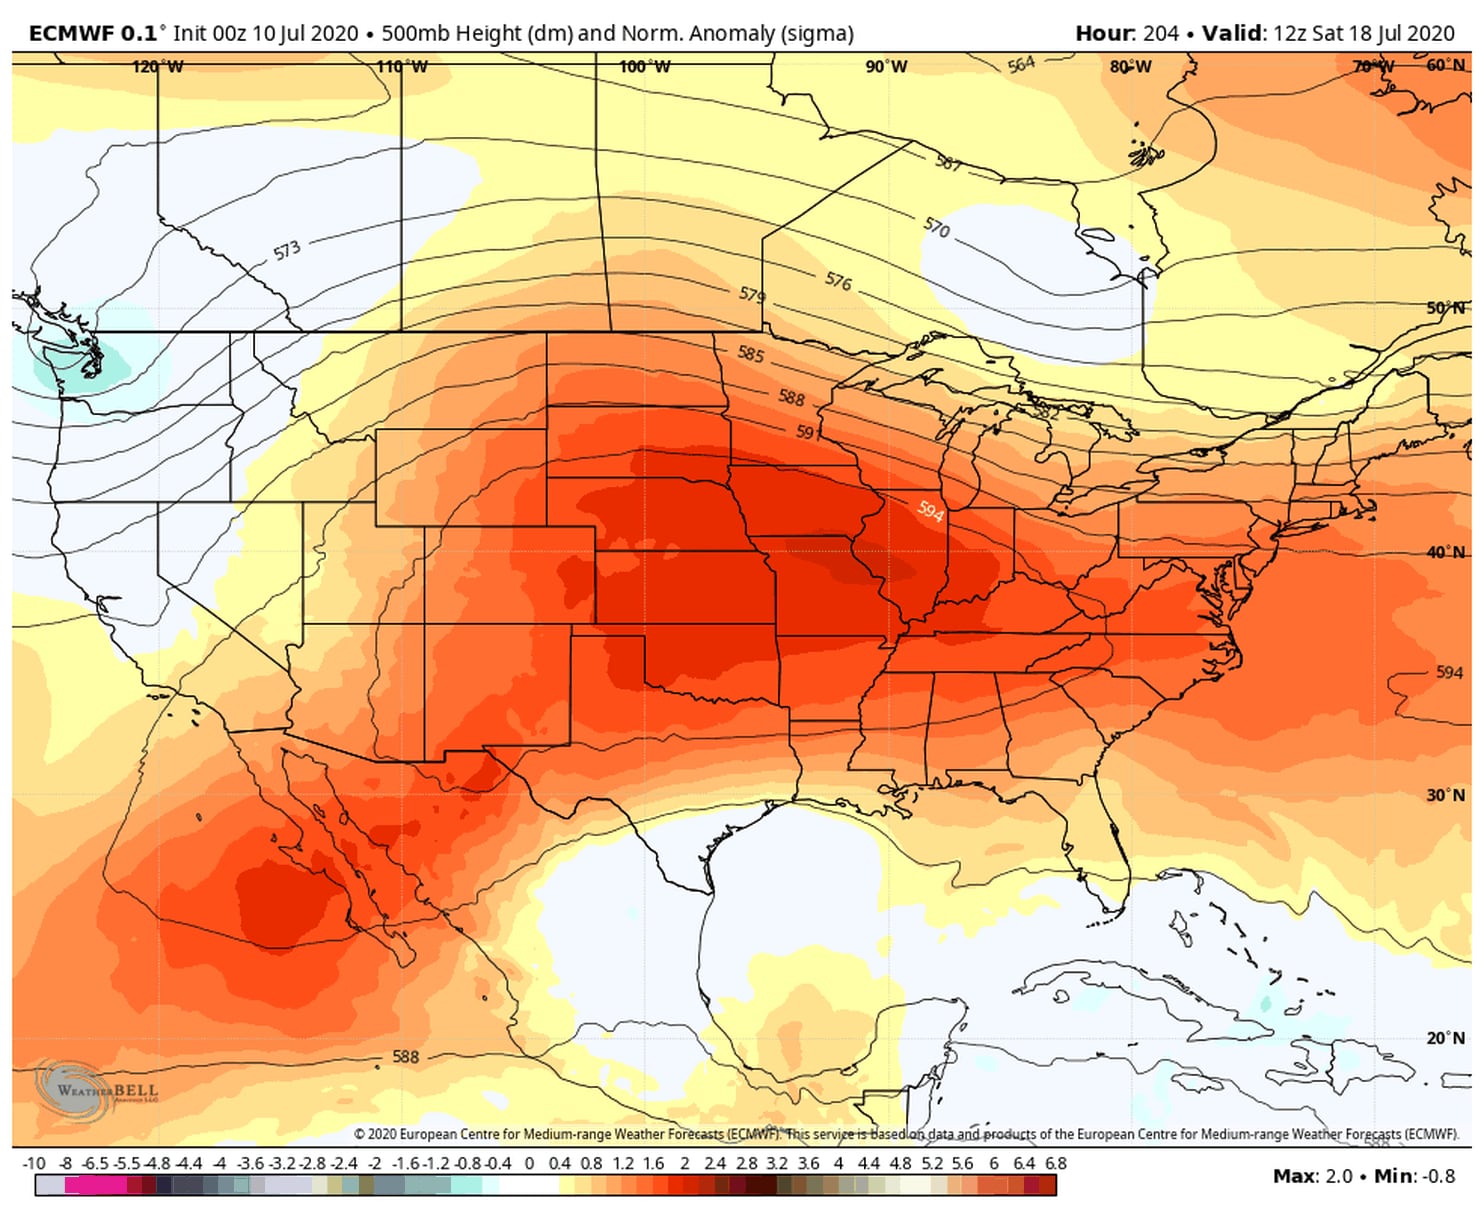 Massive heat dome forecast to swell over much of Lower 48 within a week